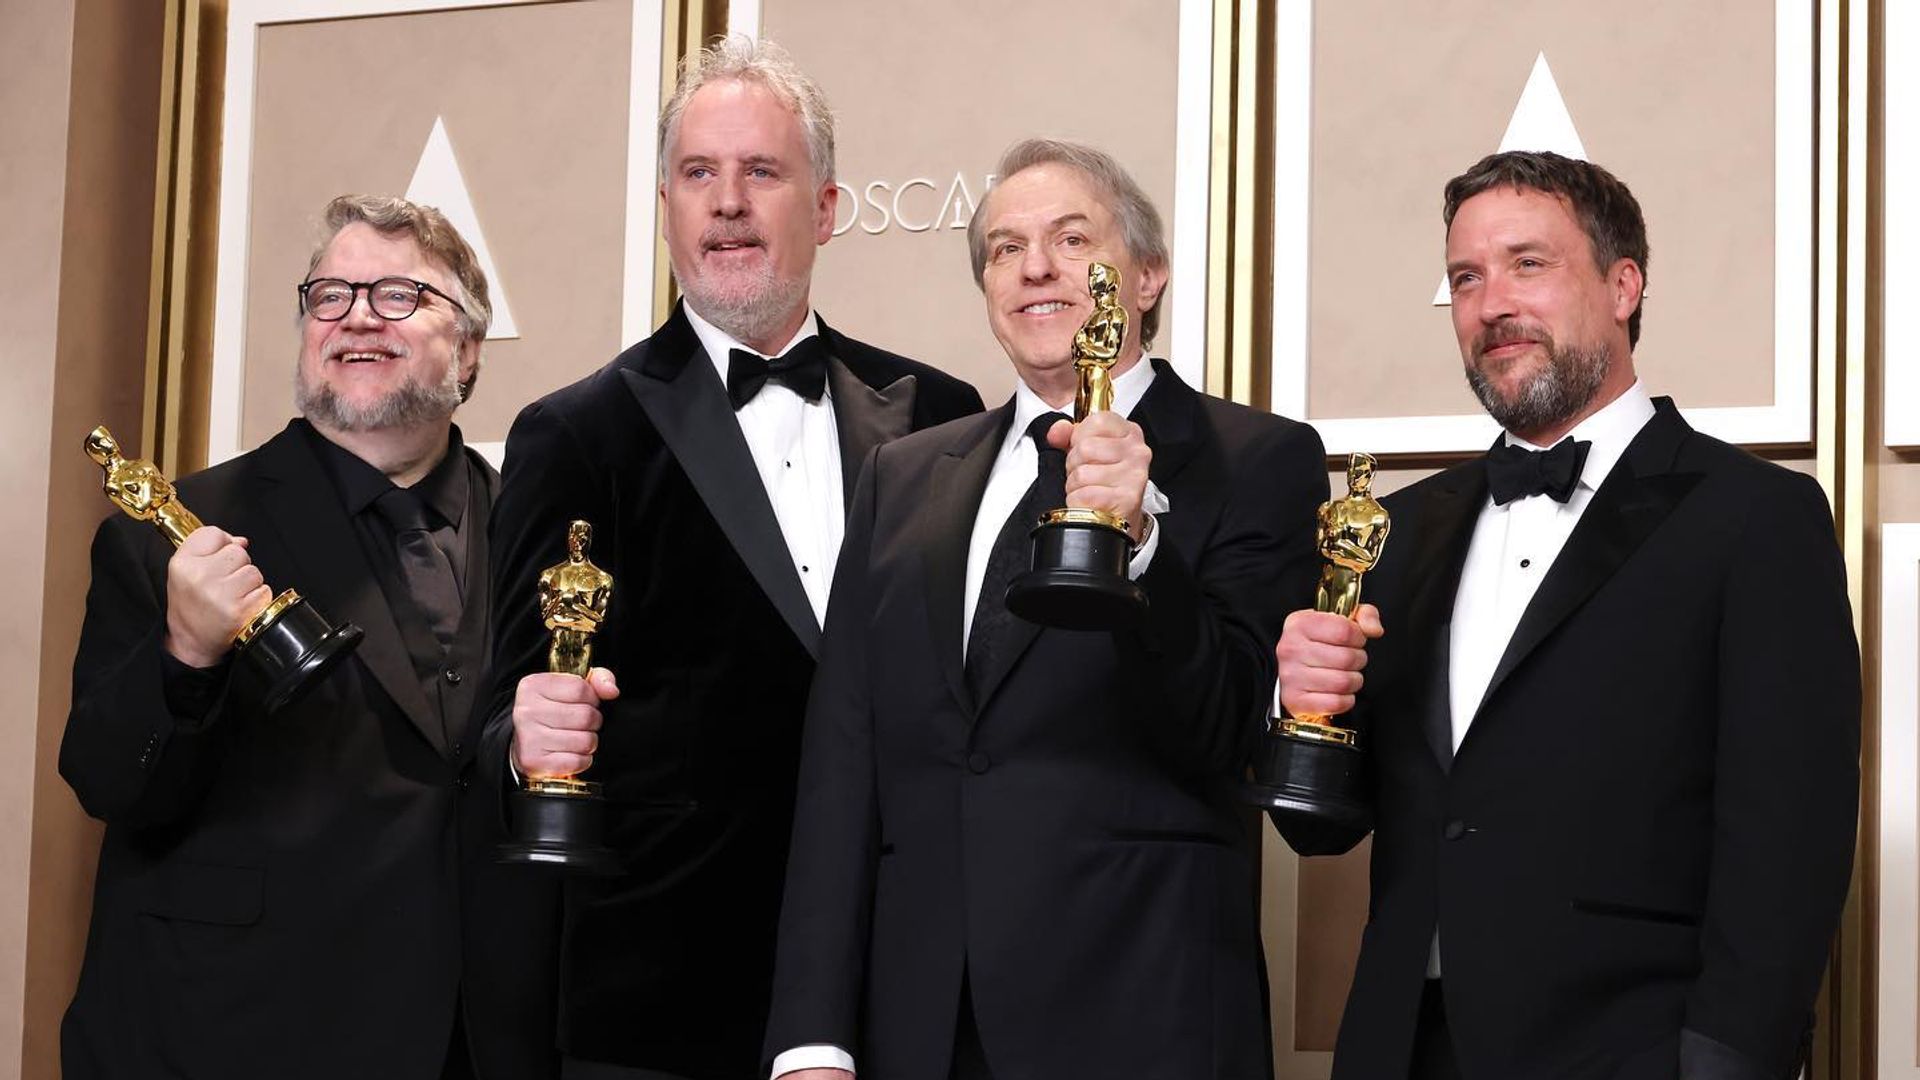 This is the director's third Oscar win